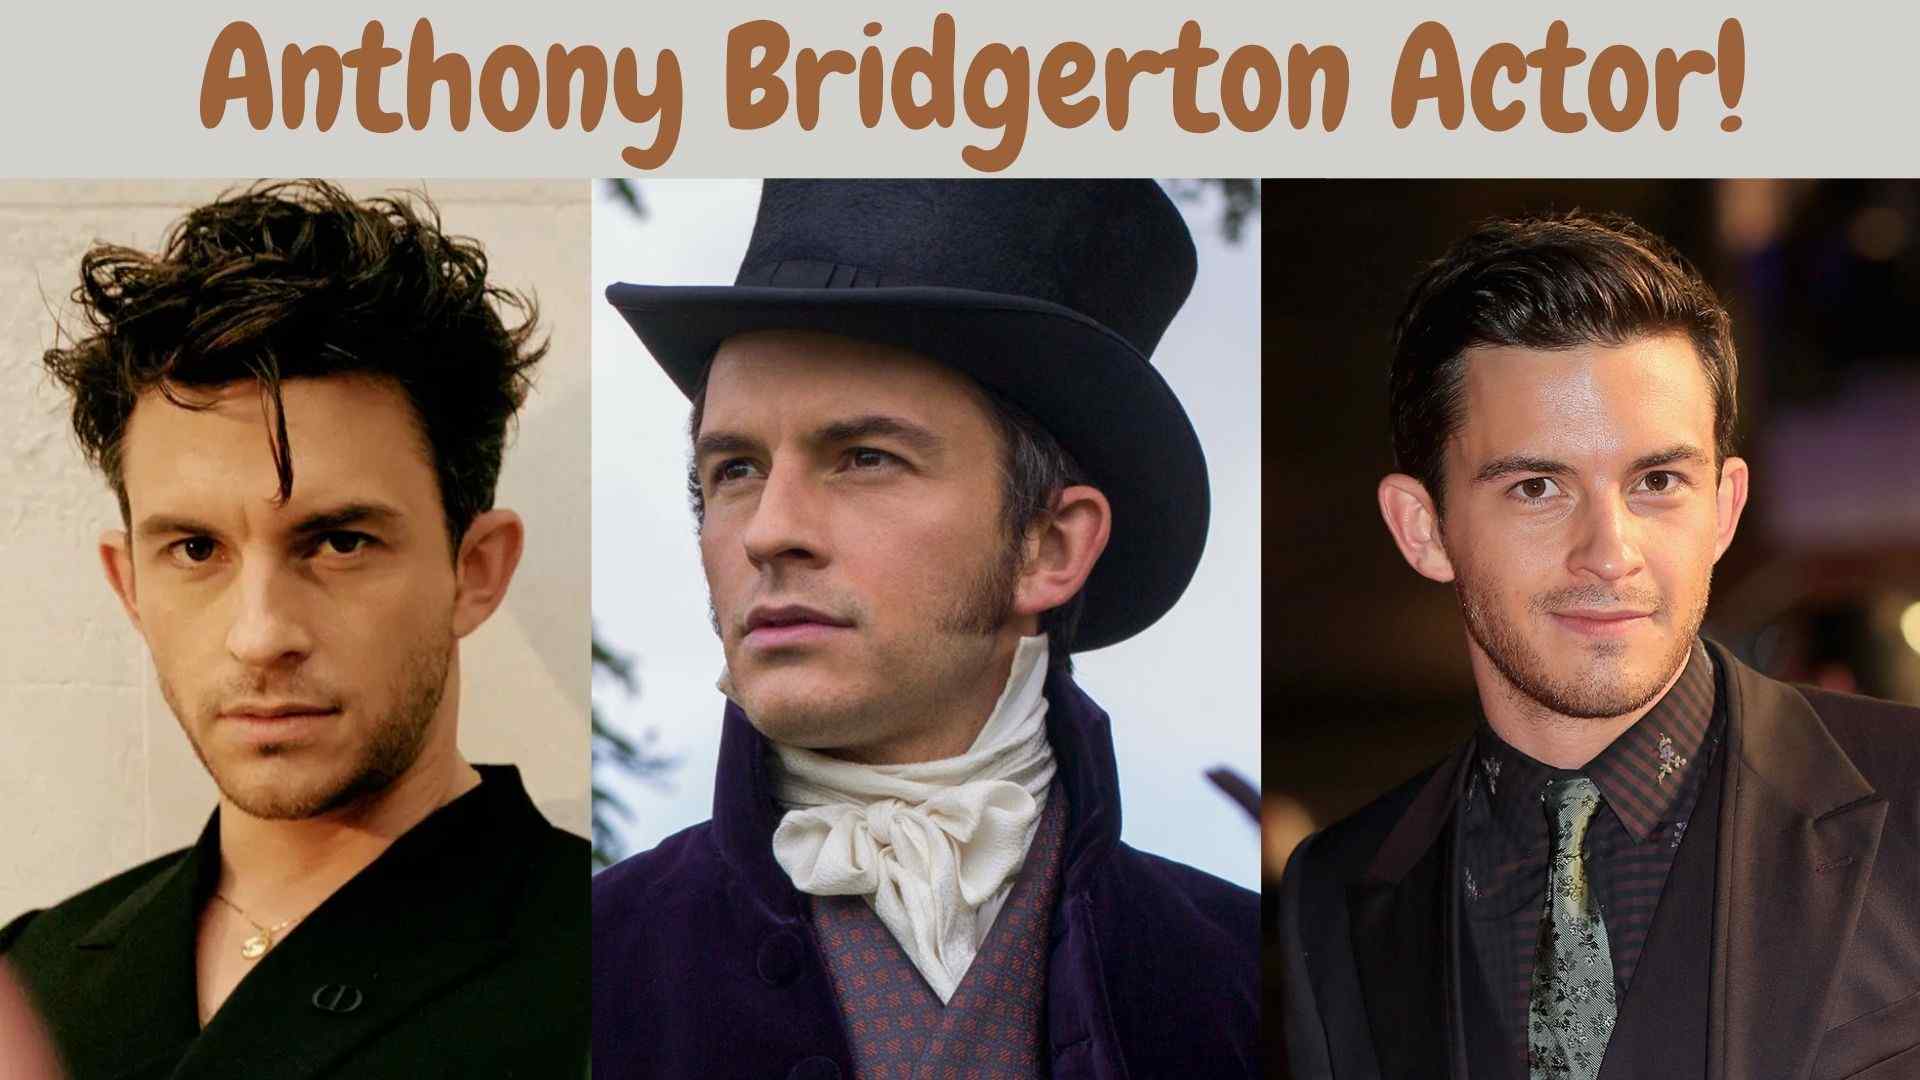 Anthony Bridgerton Actor Wallpaper and images